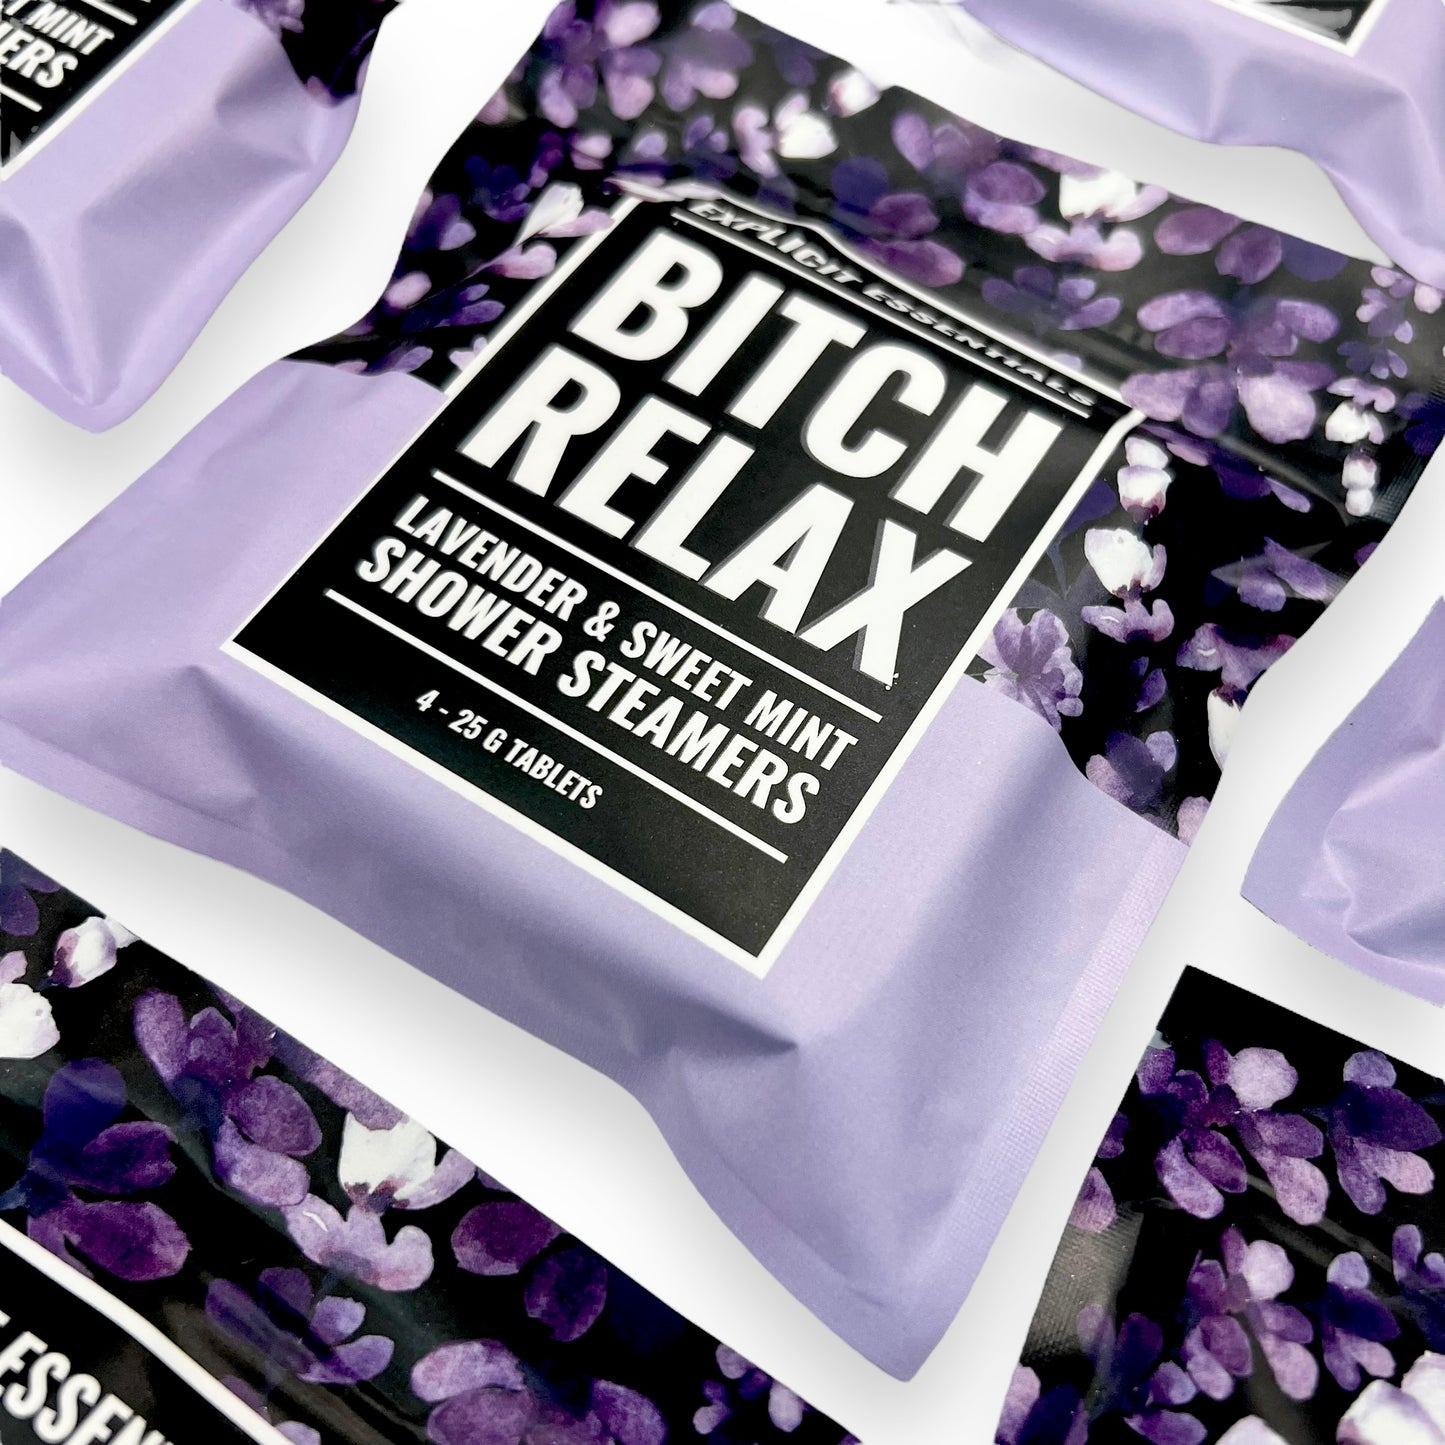 Bitch Relax Shower Steamers